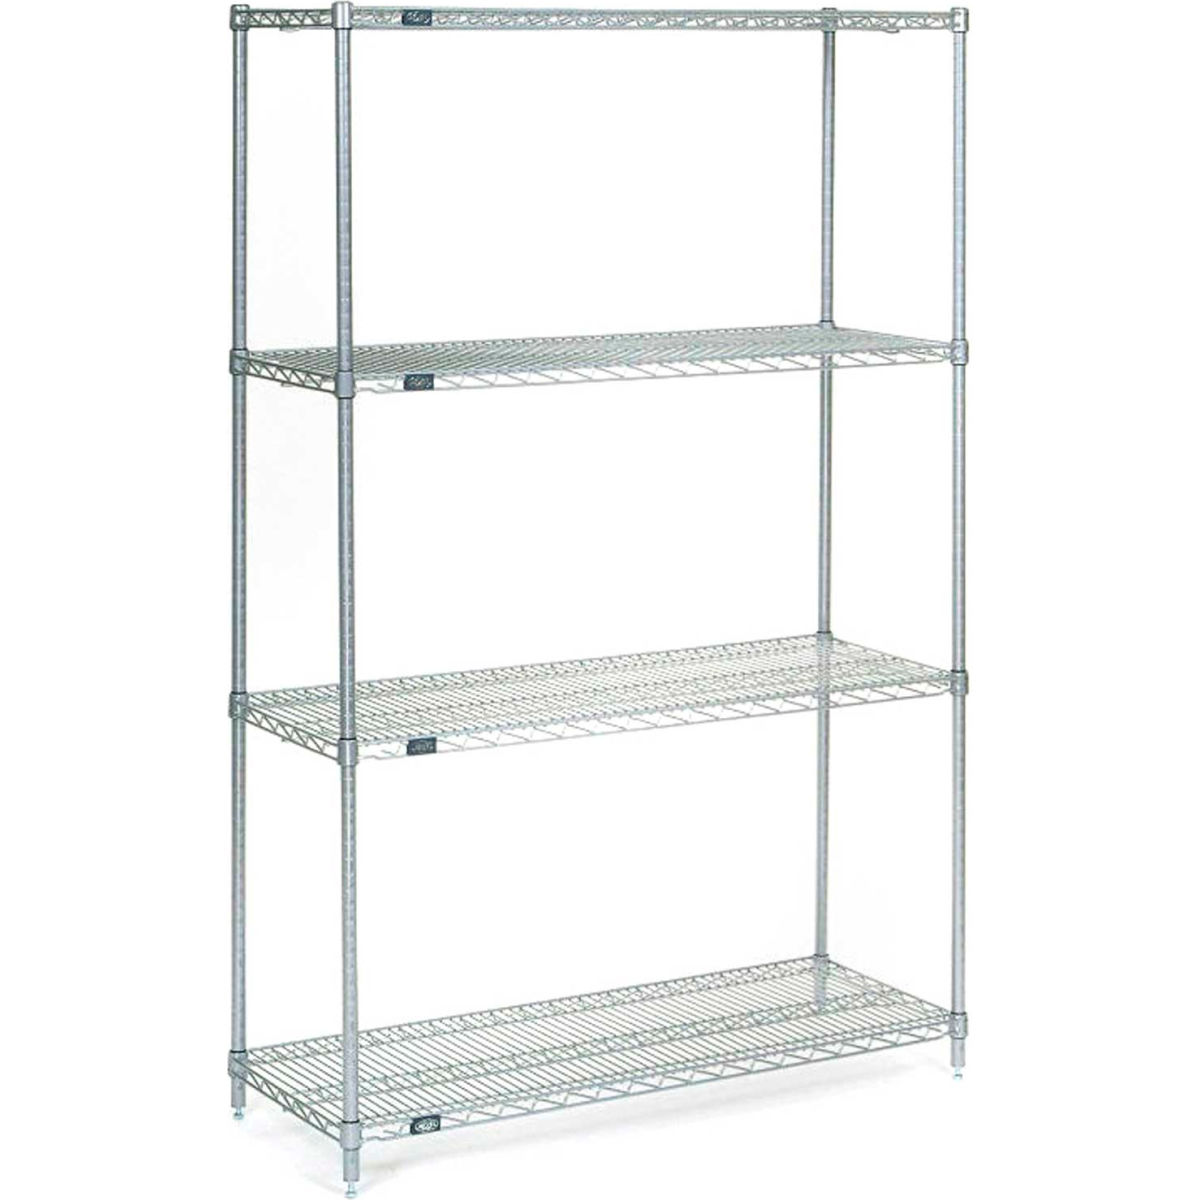 Picture of Global Industrial 14308S 86 x 30 x 14 in. Nexel Stainless Steel Starter Wire Shelving